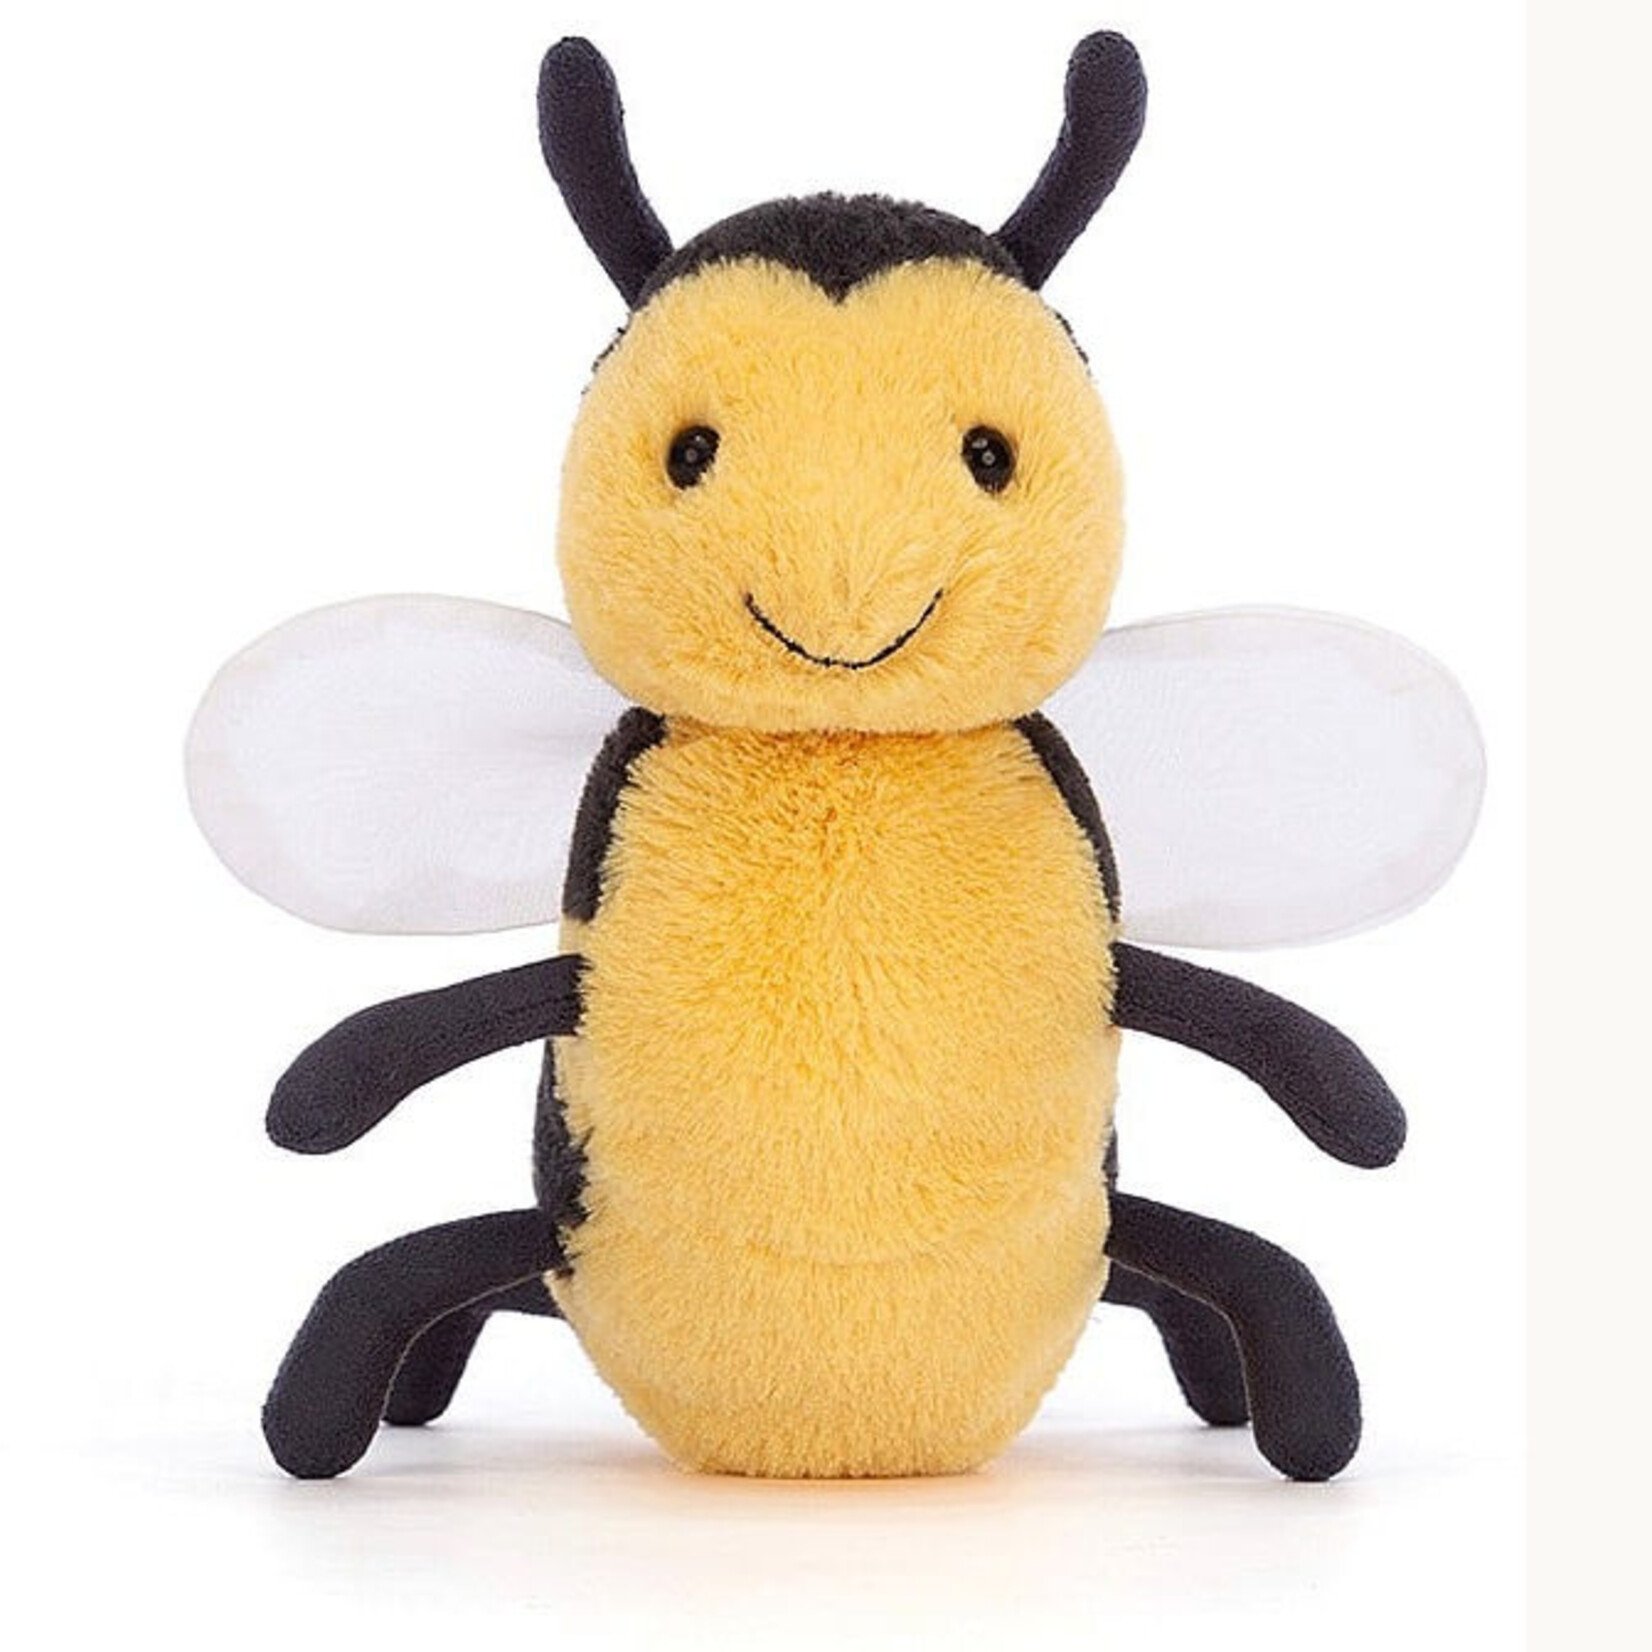 JELLYCAT BRYNLEE BEE